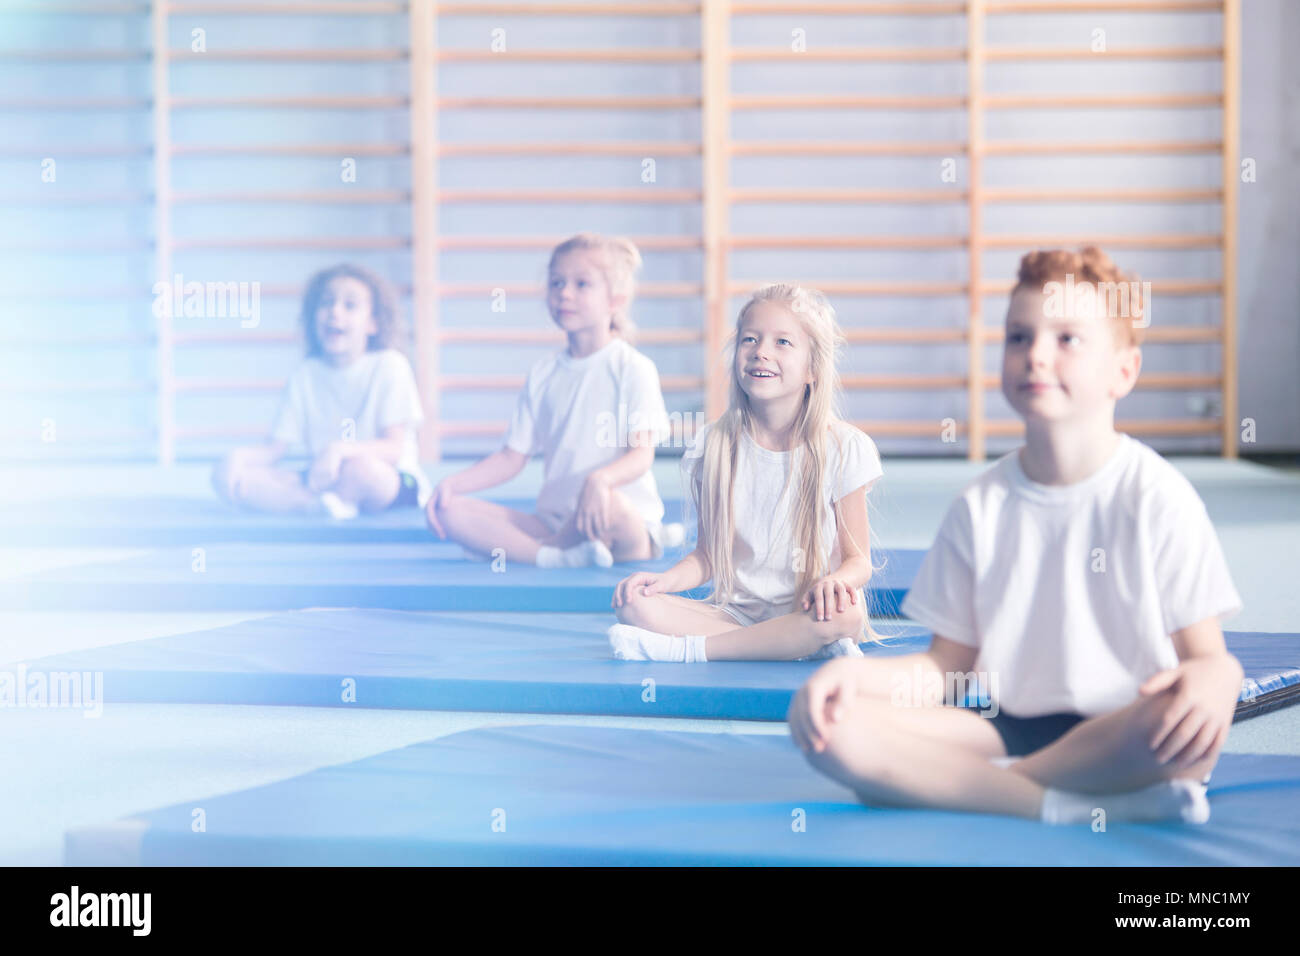 Curious and amazed children in school sportswear sitting in a gym interior during extracurricular yoga class and looking up in the direction of a flar Stock Photo